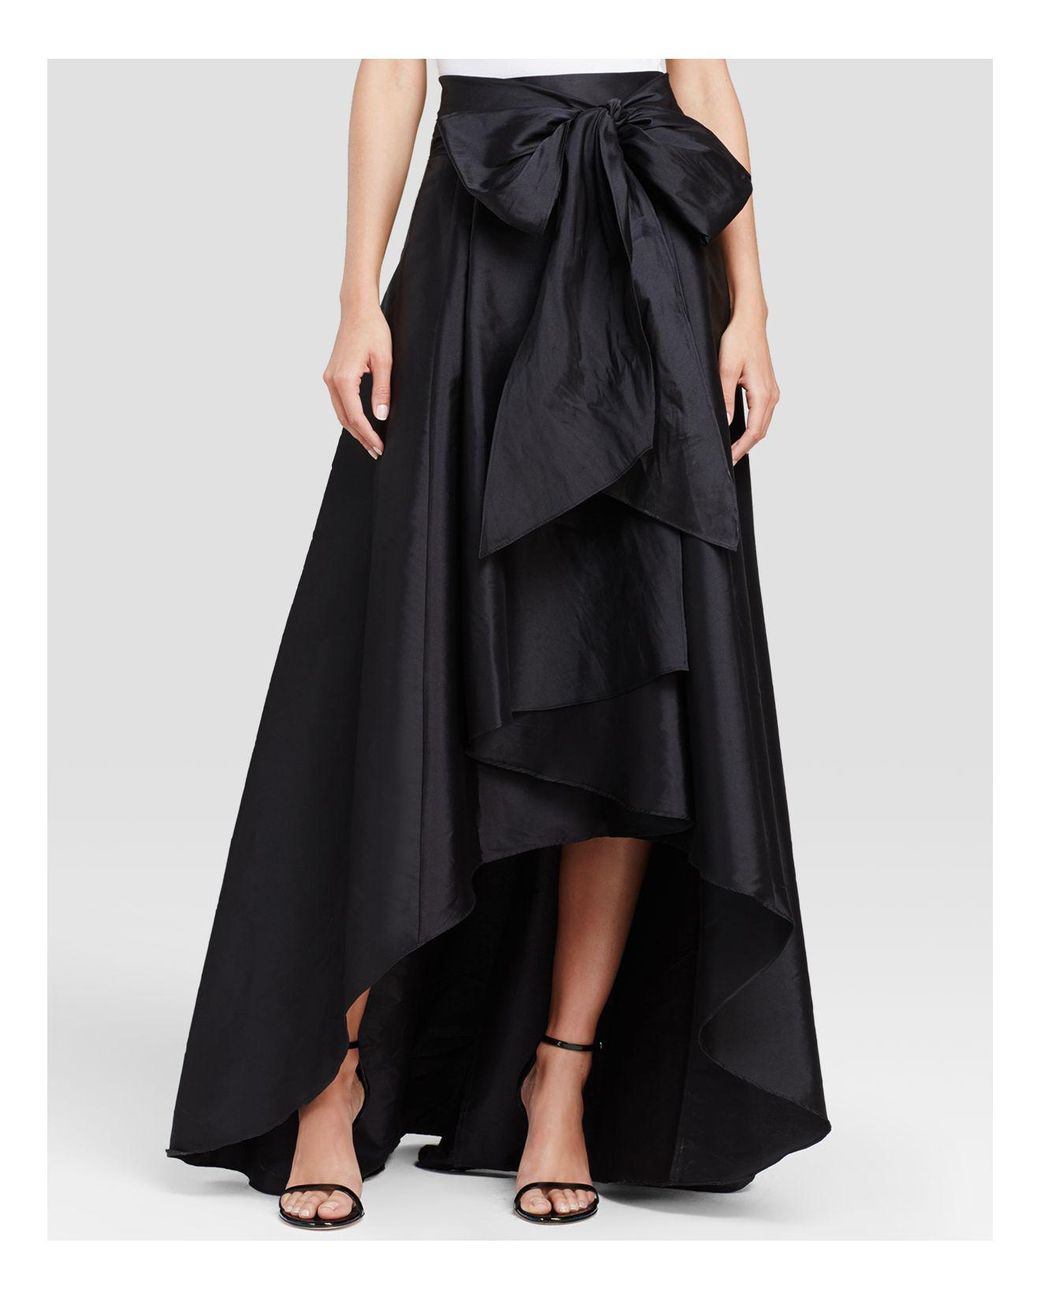 Adrianna Papell High/low Ball Skirt in Black | Lyst